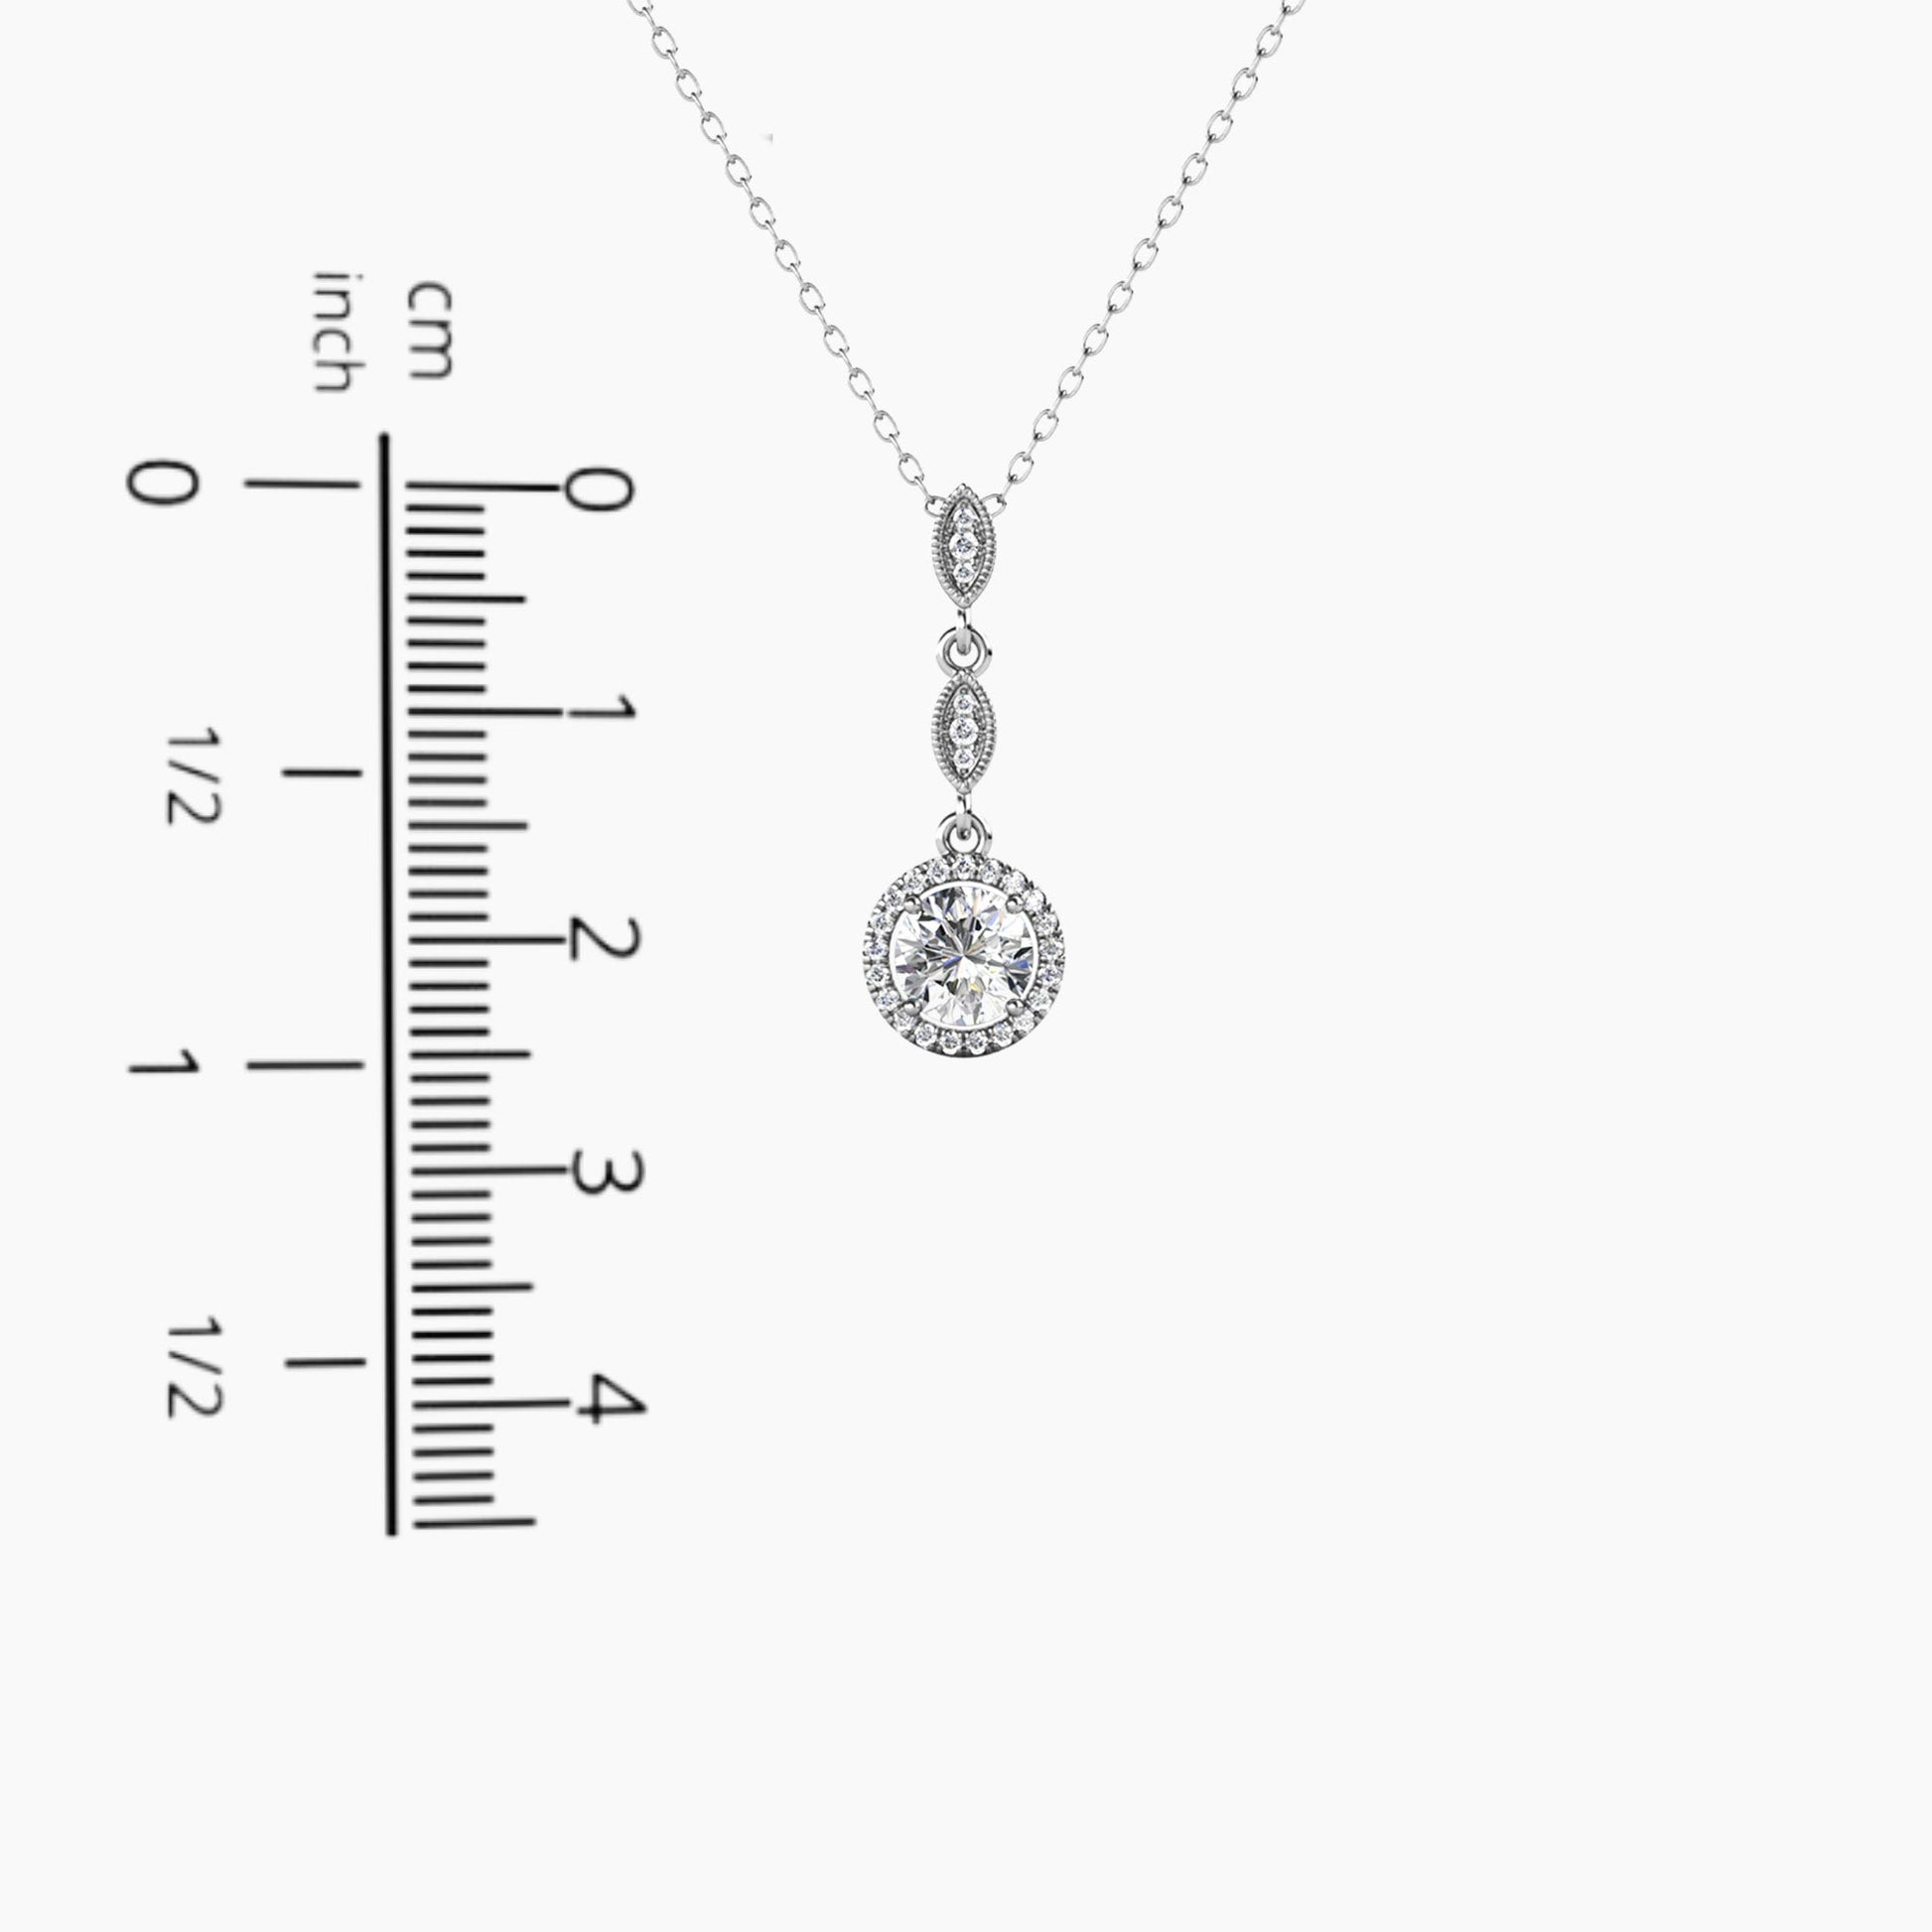 Moissanite 1ct. Etonnante Pendant Necklace displayed next to a scale, providing an accurate representation of its size and dimensions.